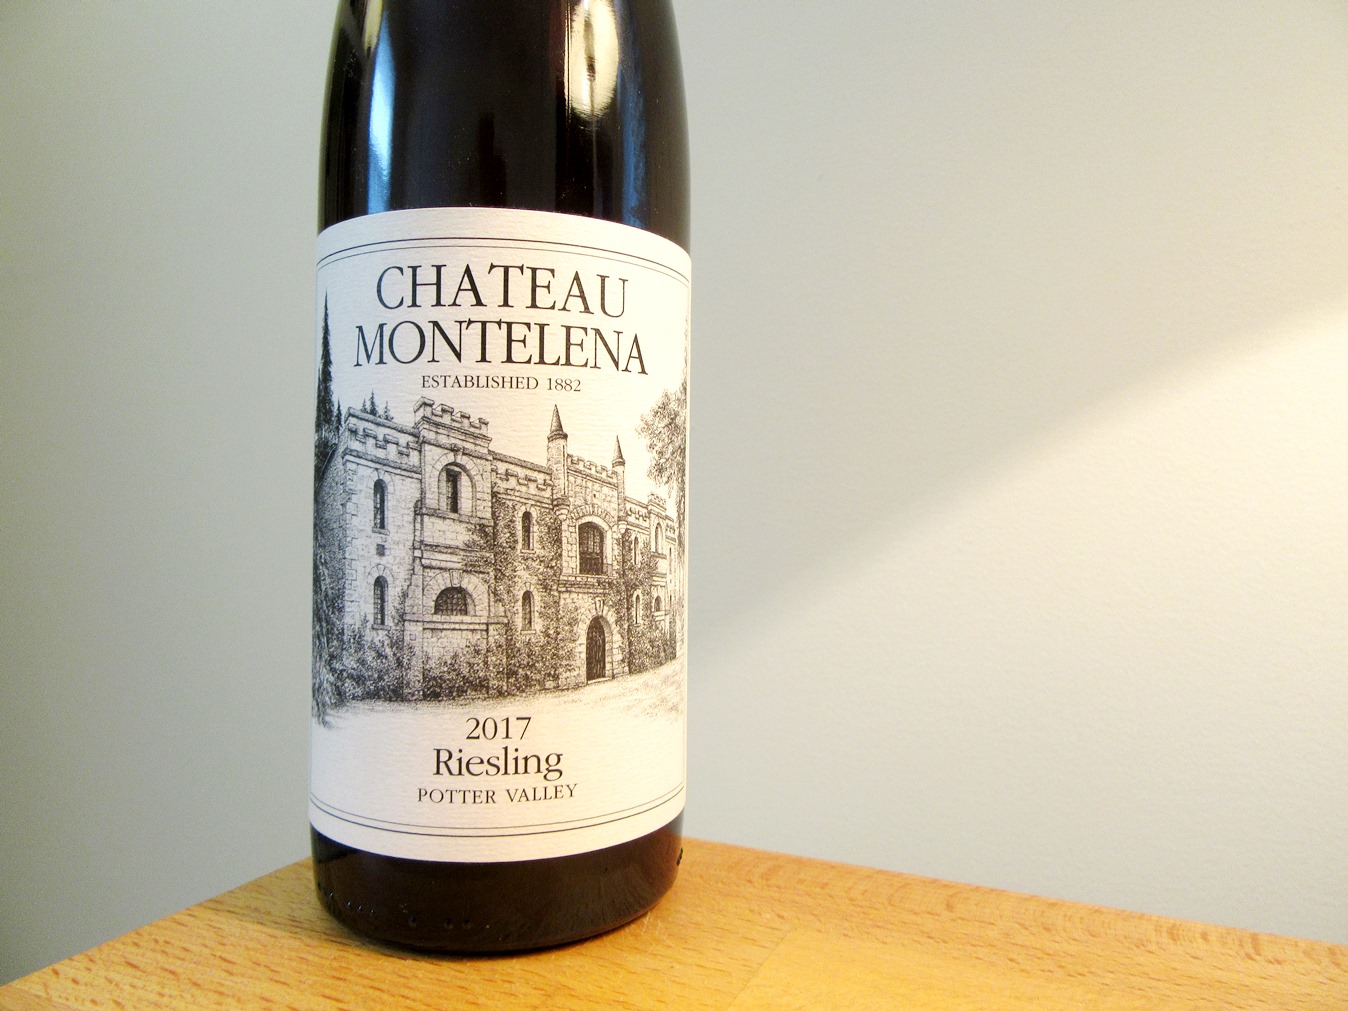 Chateau Montelena, Riesling 2017, Potter Valley, California, Wine Casual